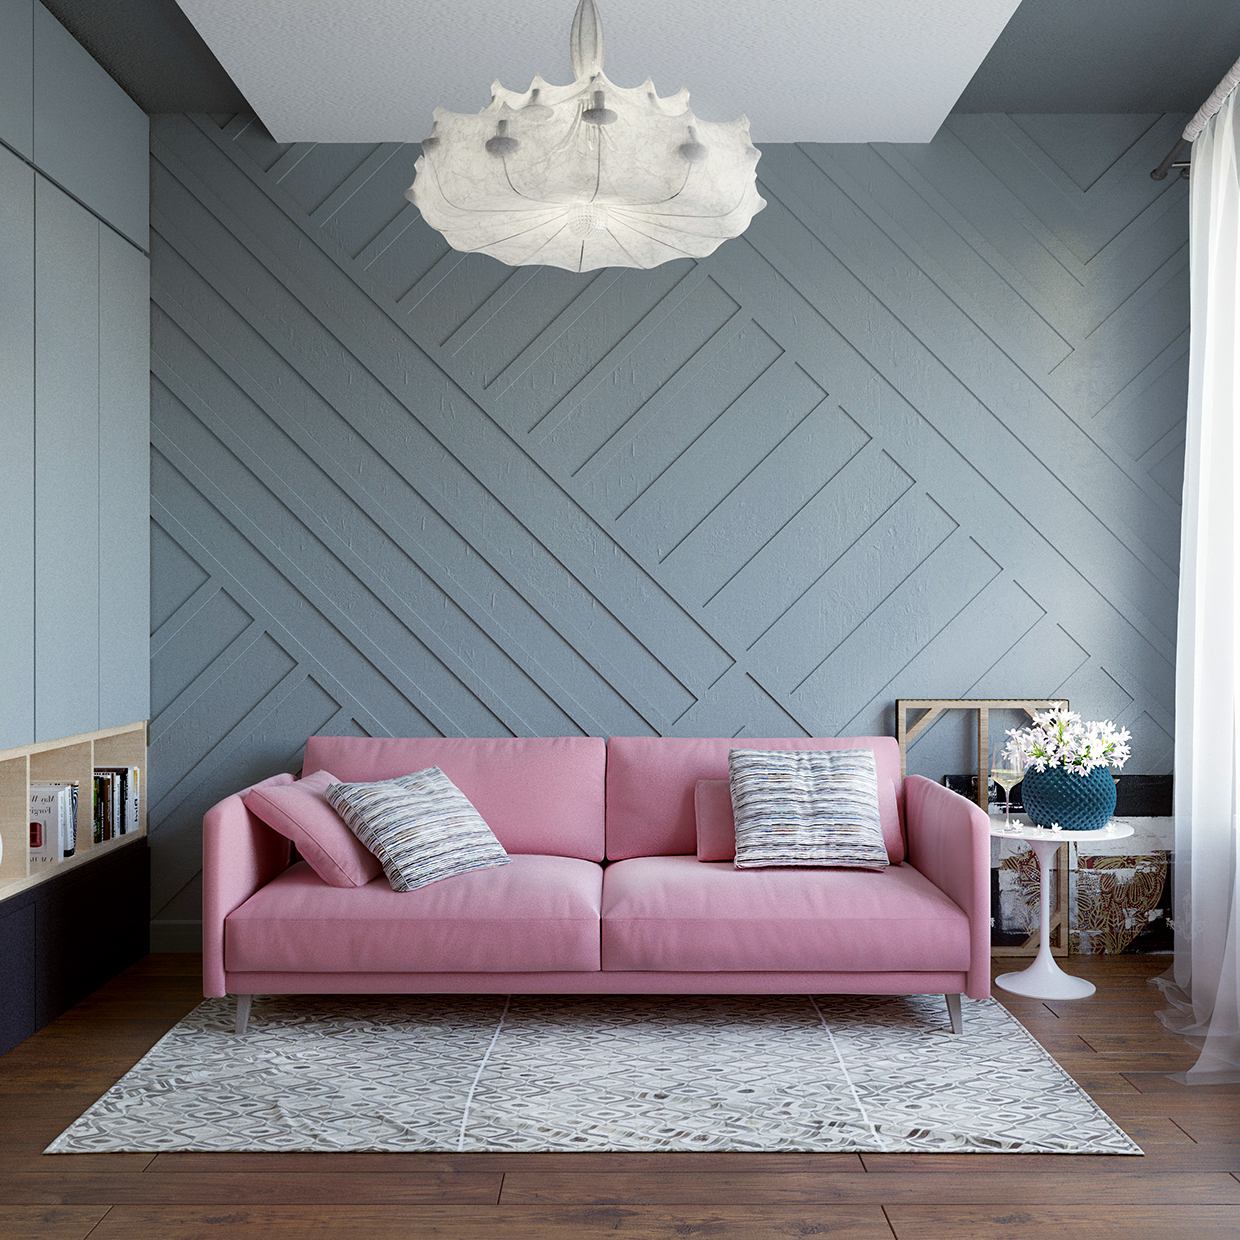 Decorating the small living room "width =" 1240 "height =" 1240 "srcset =" https://mileray.com/wp-content/uploads/2020/05/1588517316_728_Living-Room-Decorating-Ideas-With-Minimalist-Design.jpg 1240w, https://mileray.com /wp-content/uploads/2016/08/Zinaida-Baklanova7-150x150.jpg 150w, https://mileray.com/wp-content/uploads/2016/08/Zinaida-Baklanova7-300x300.jpg 300w, https: / /mileray.com/wp-content/uploads/2016/08/Zinaida-Baklanova7-768x768.jpg 768w, https://mileray.com/wp-content/uploads/2016/08/Zinaida-Baklanova7-1024x1024.jpg 1024w , https://mileray.com/wp-content/uploads/2016/08/Zinaida-Baklanova7-696x696.jpg 696w, https://mileray.com/wp-content/uploads/2016/08/Zinaida-Baklanova7- 1068x1068.jpg 1068w, https://mileray.com/wp-content/uploads/2016/08/Zinaida-Baklanova7-420x420.jpg 420w "sizes =" (maximum width: 1240px) 100vw, 1240px